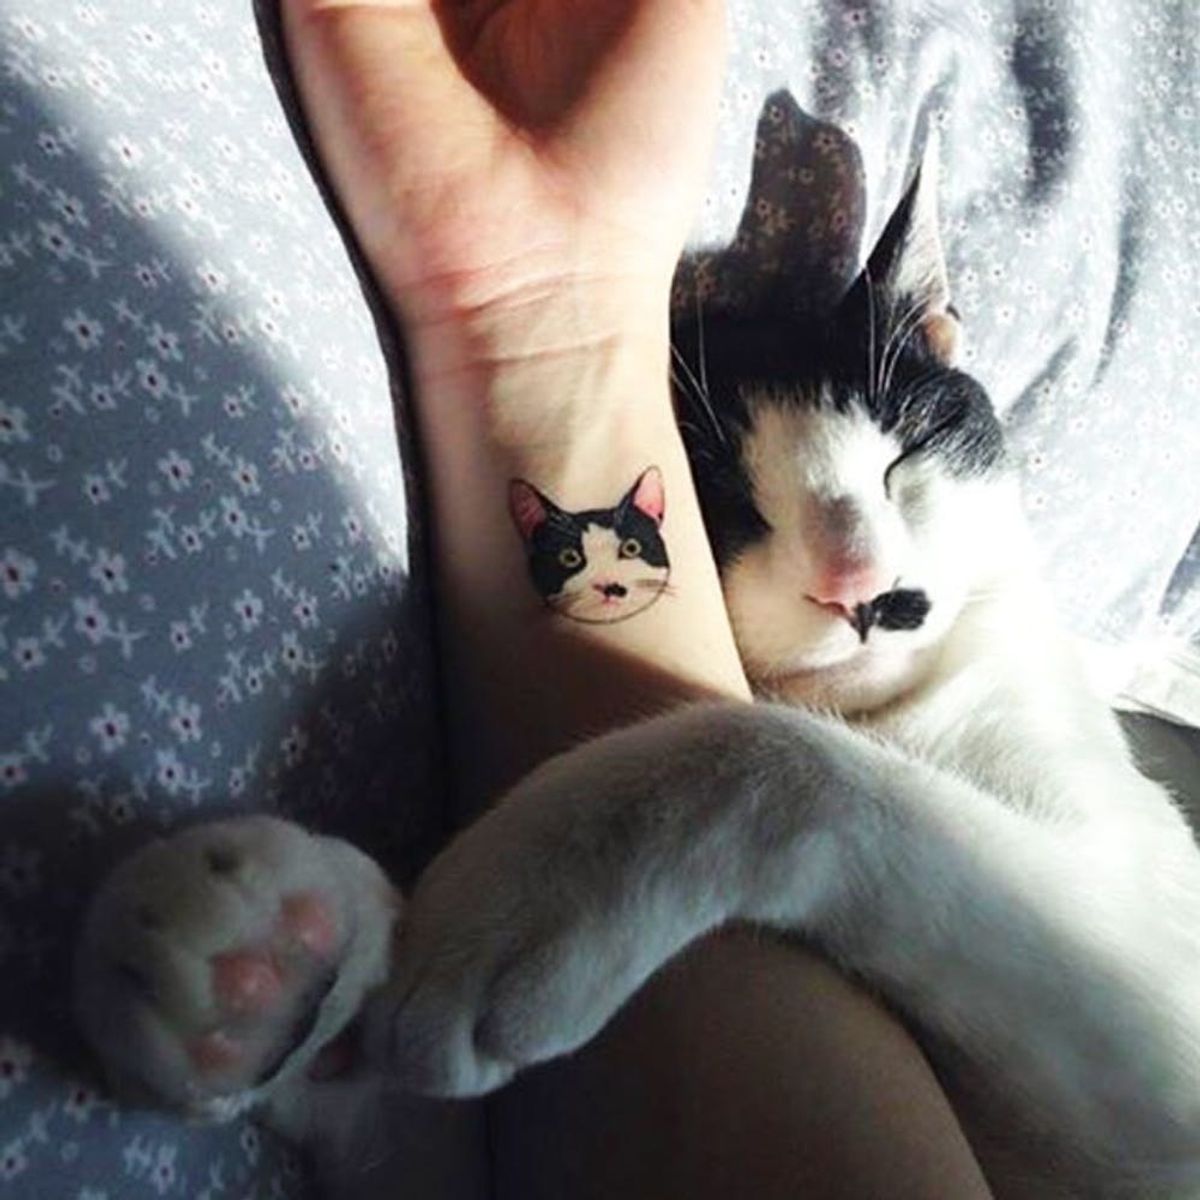 12 Pet Tattoos to Celebrate Your Furry Friend